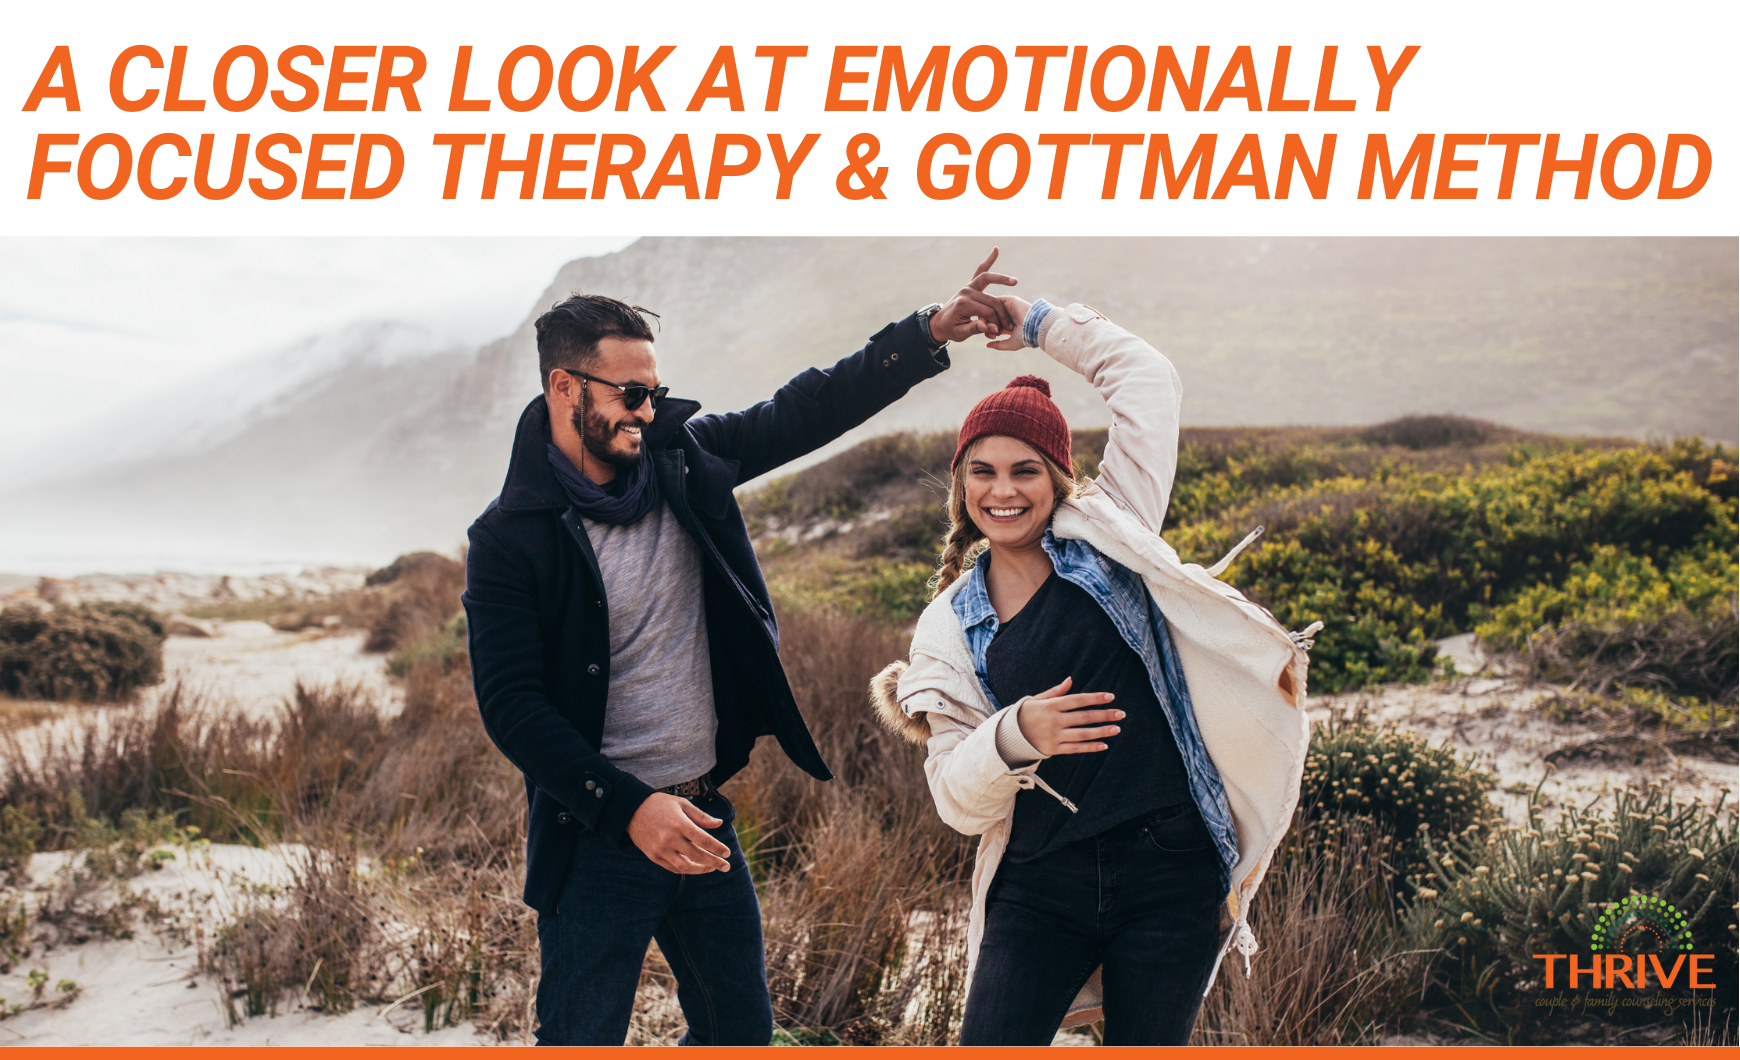 A graphic that reads "A Closer Look at Emotionally Focused Therapy & Gottman Method" in orange text above a stock photo of a couple smiling and dancing outside in the mountains, with snow in the background.